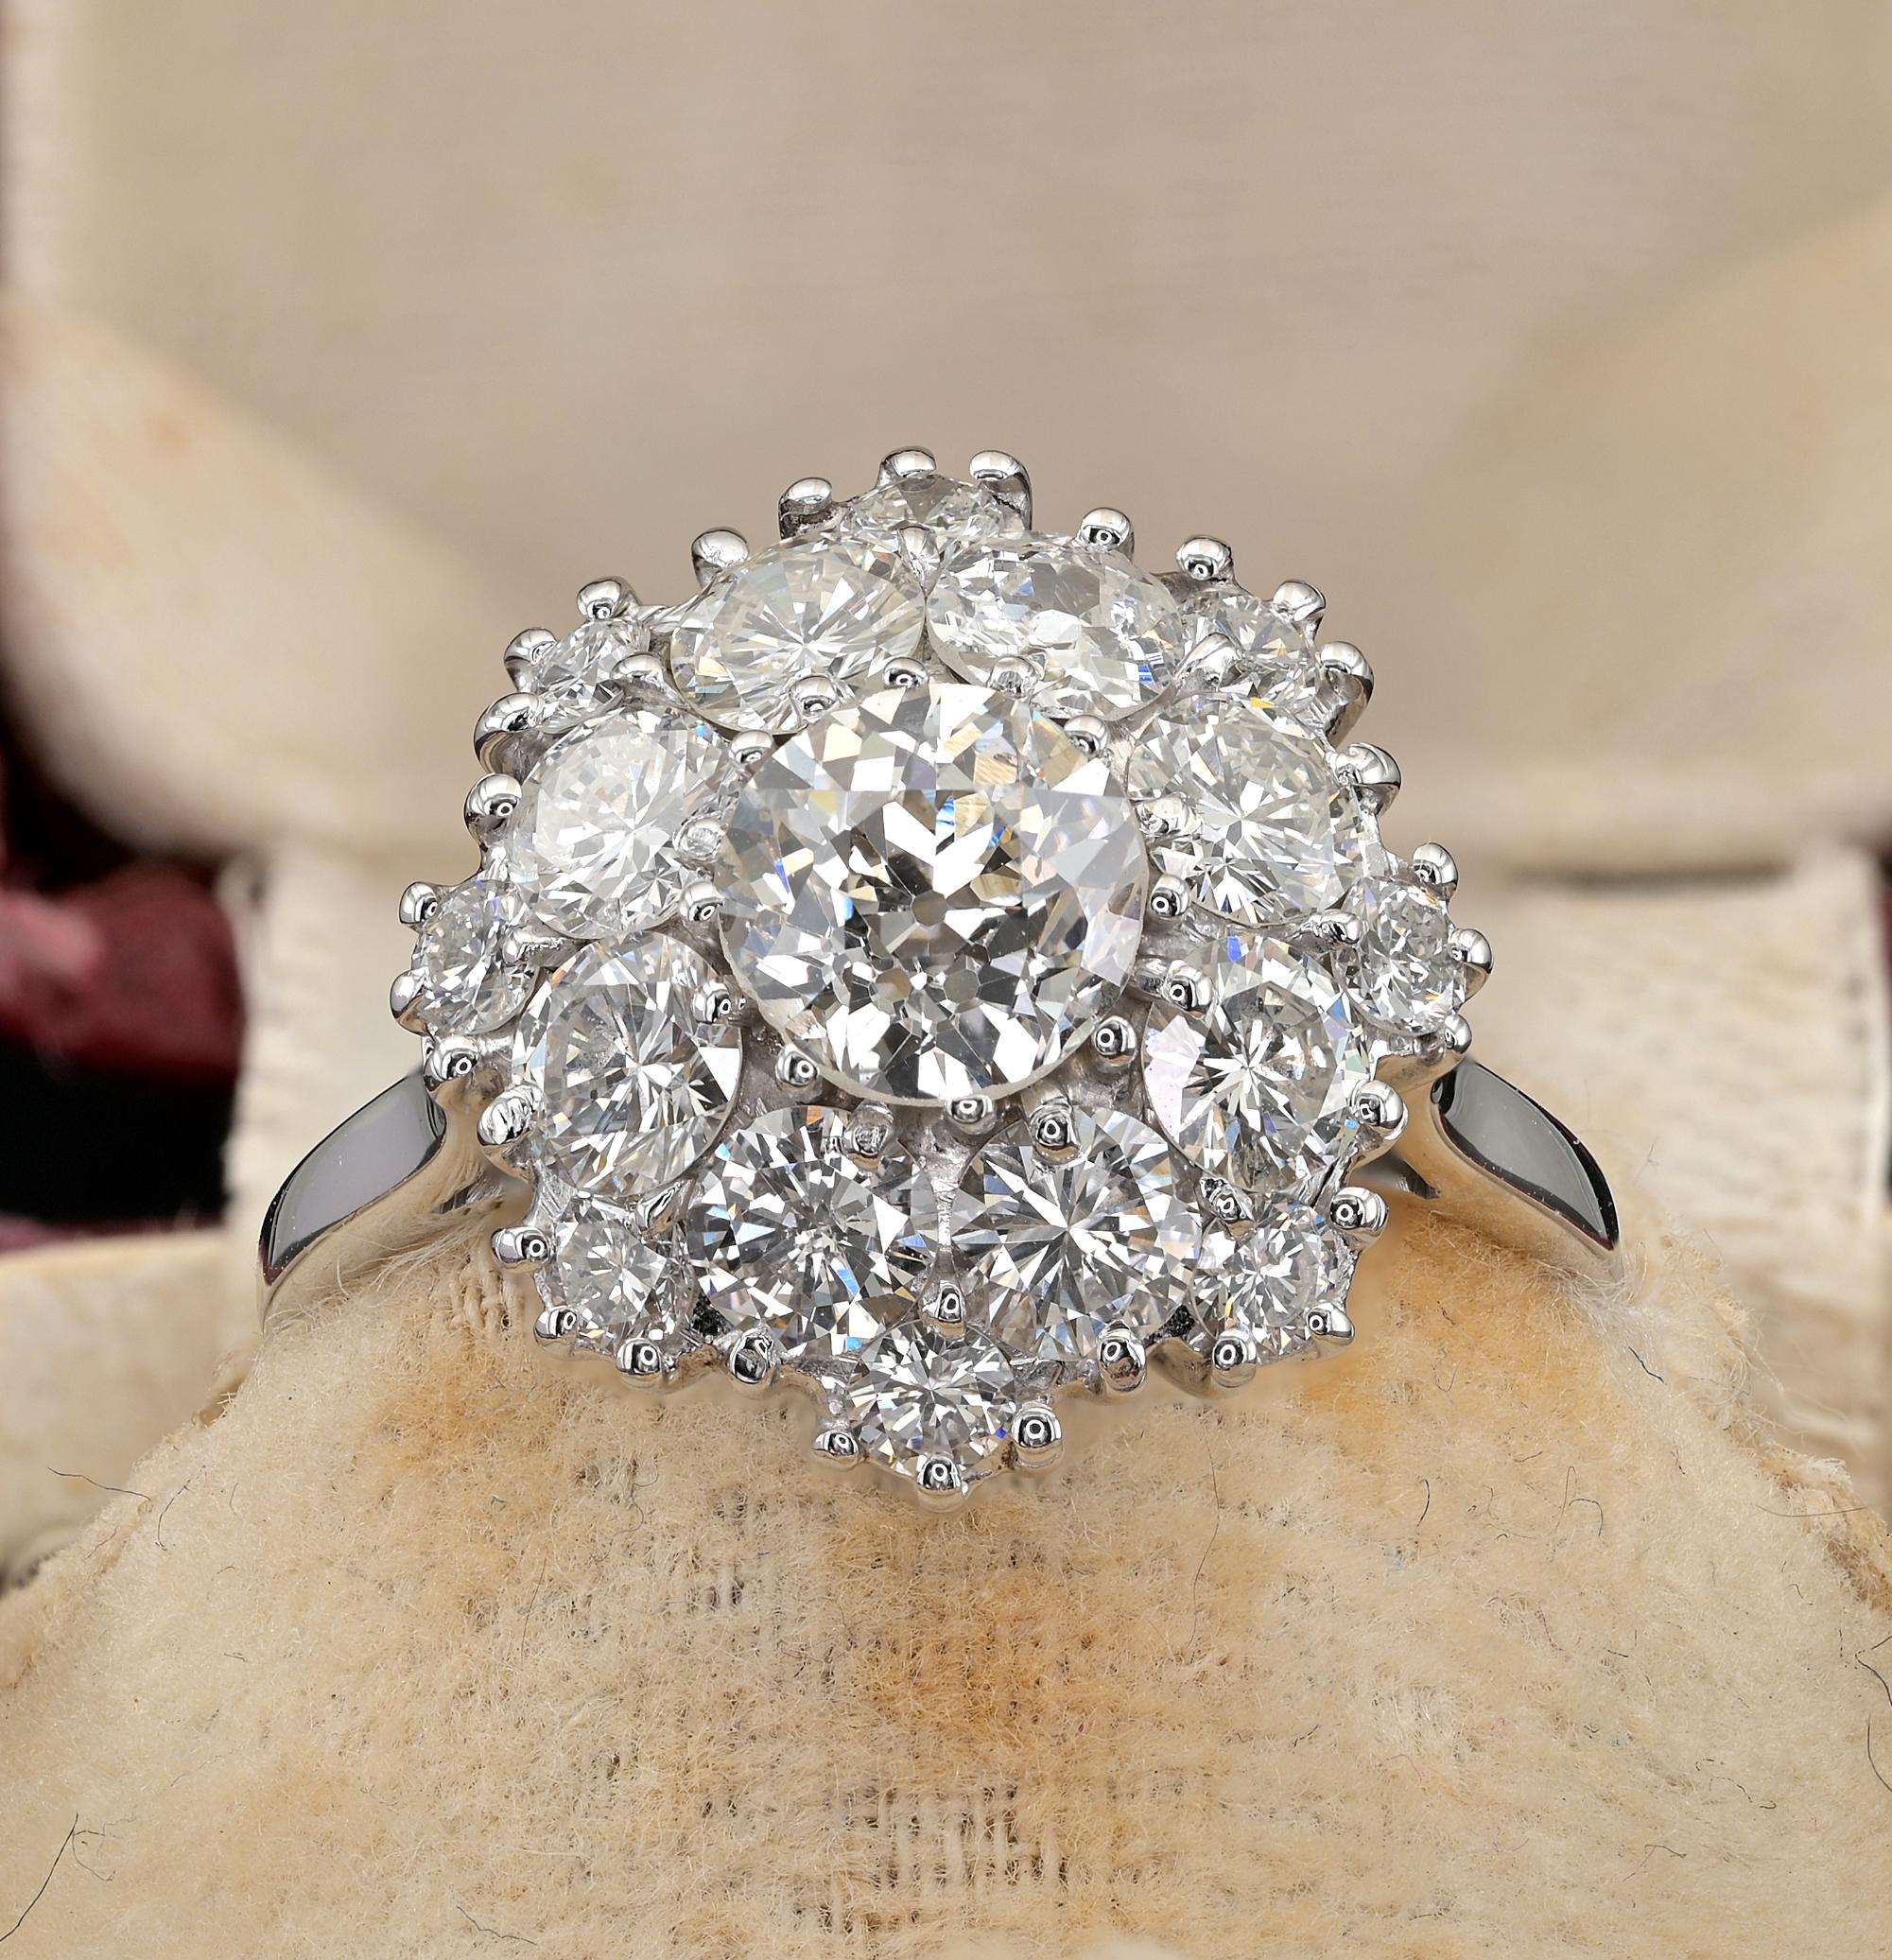 This stunning mid-century ring is 1950 ca.
Italian origin
Mounting artful hand made in a Daisy shape with a lovely old style caged basket work
18 KT solid white gold
Rich Diamond cluster crown  contains as follow:
1 old European cut diamond of